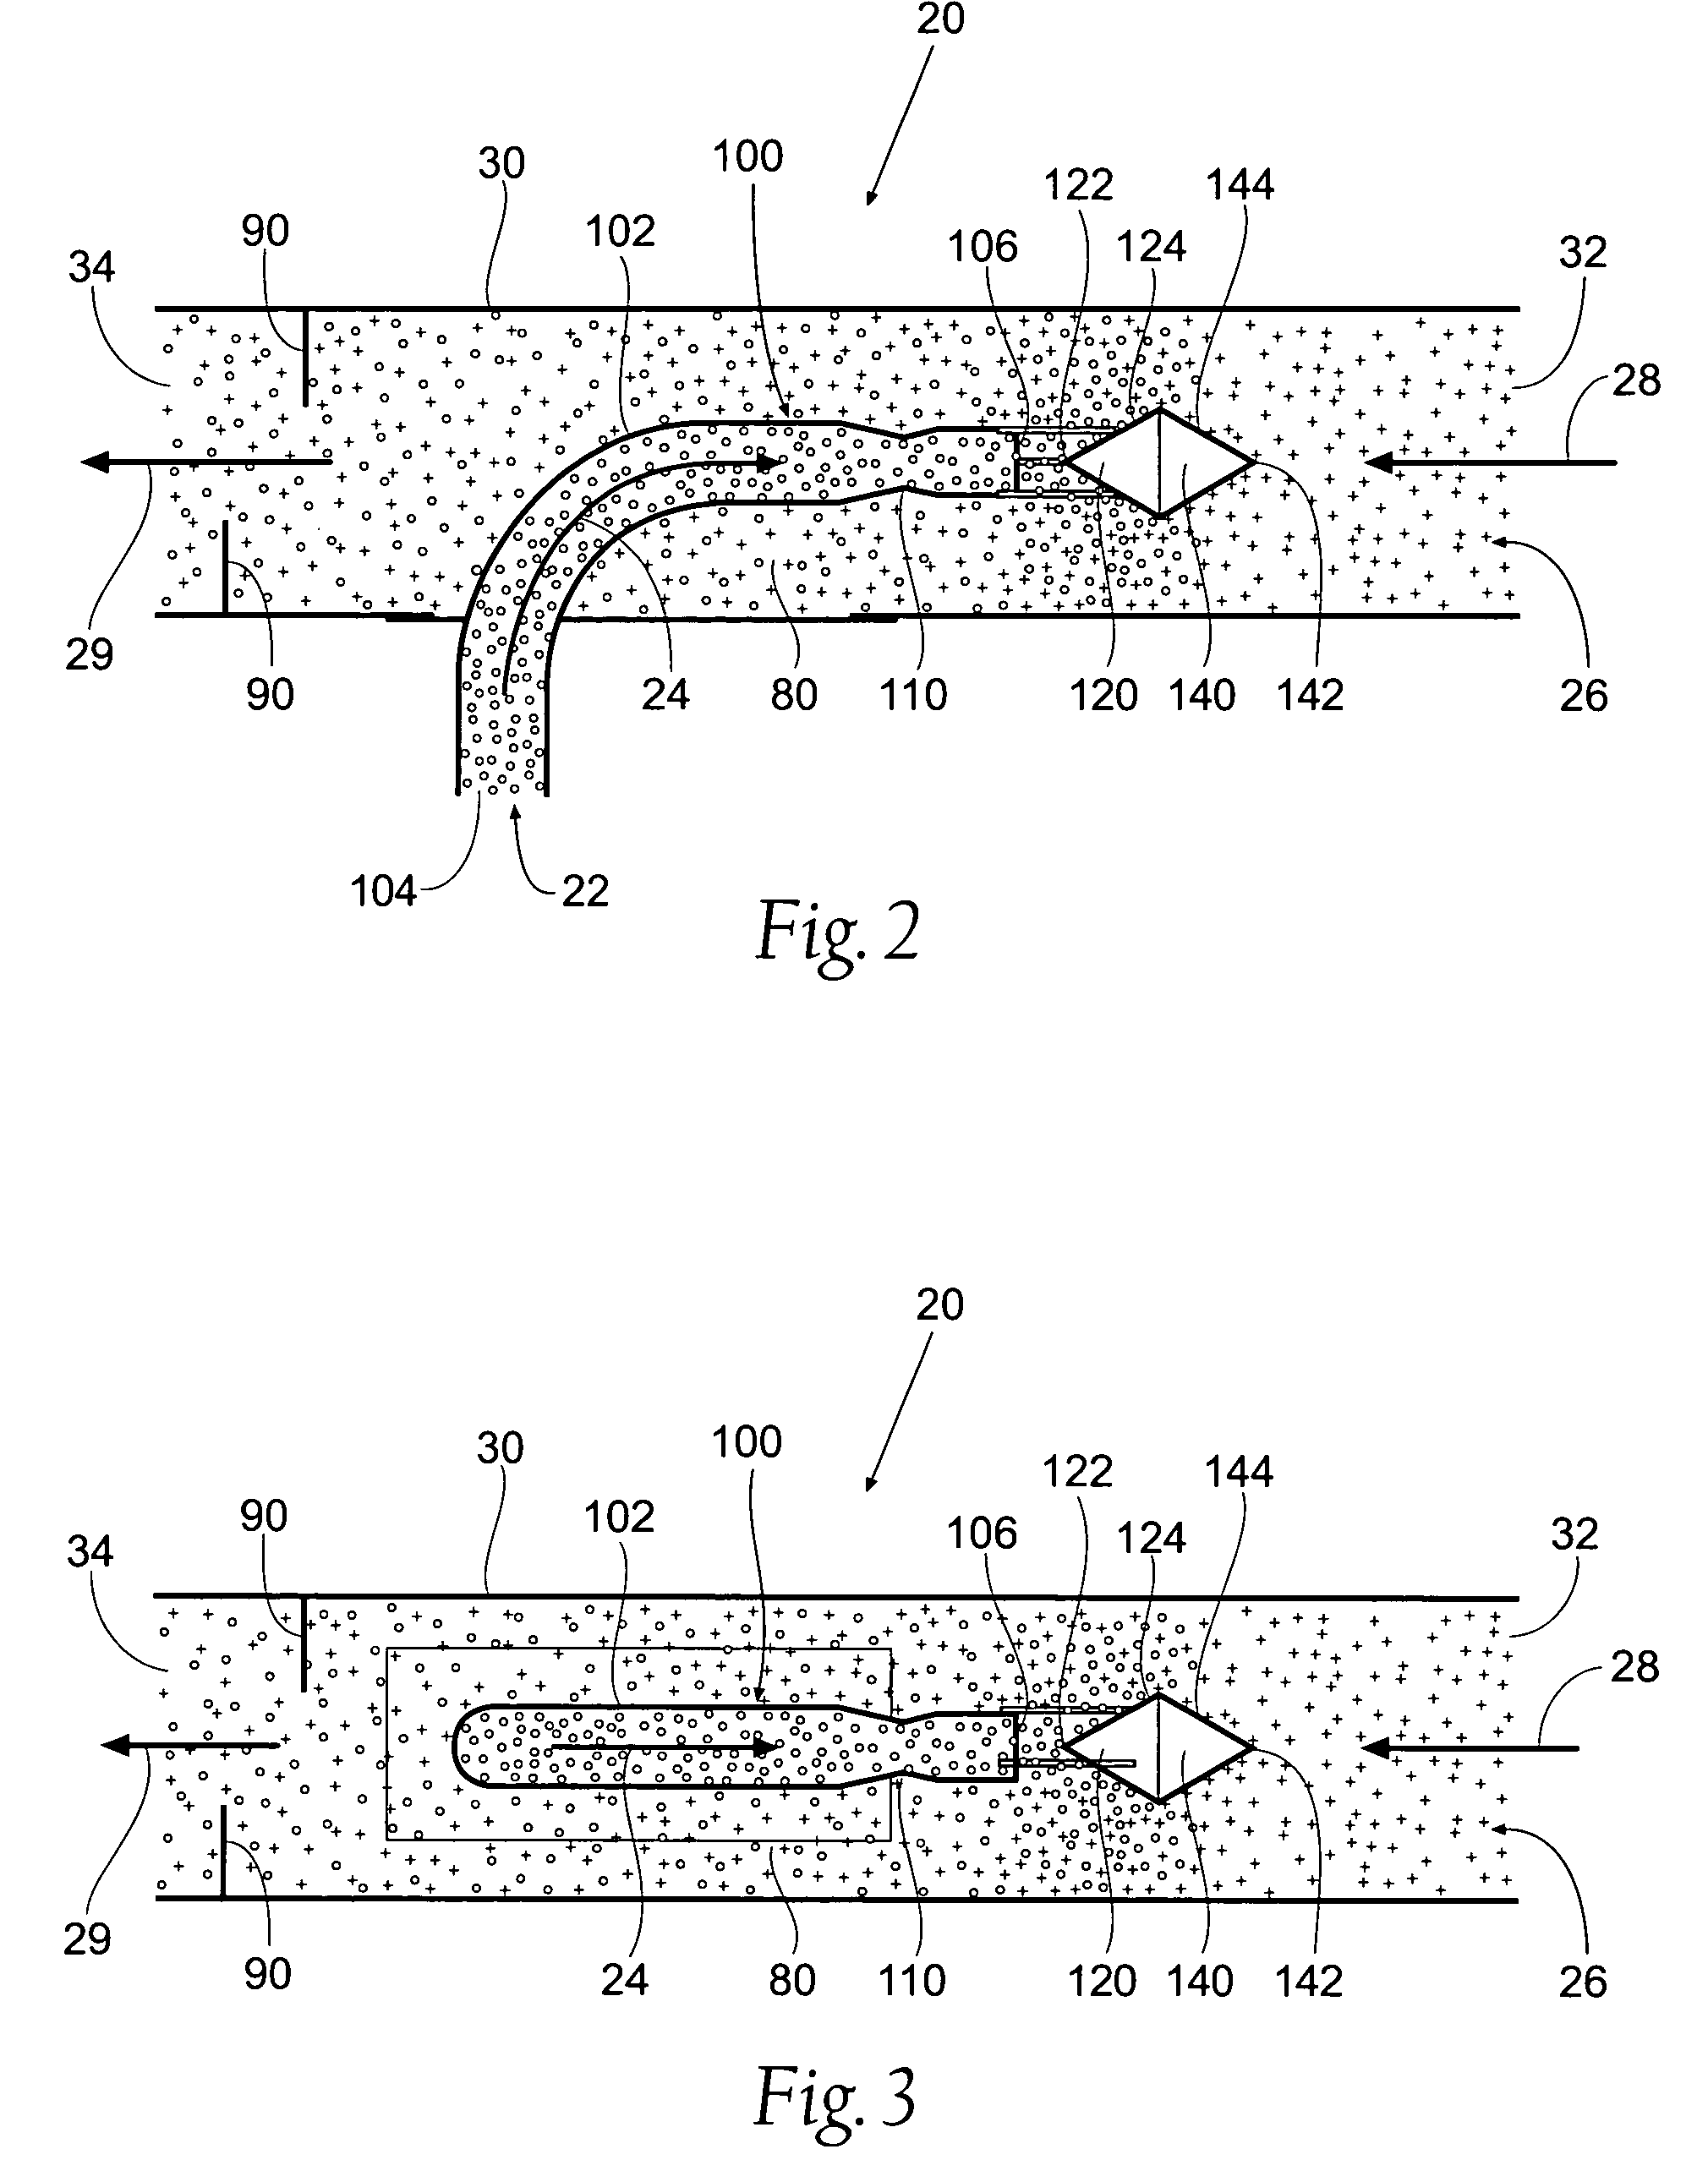 Super absorbent distribution system design for homogeneous distribution throughout an absorbent core